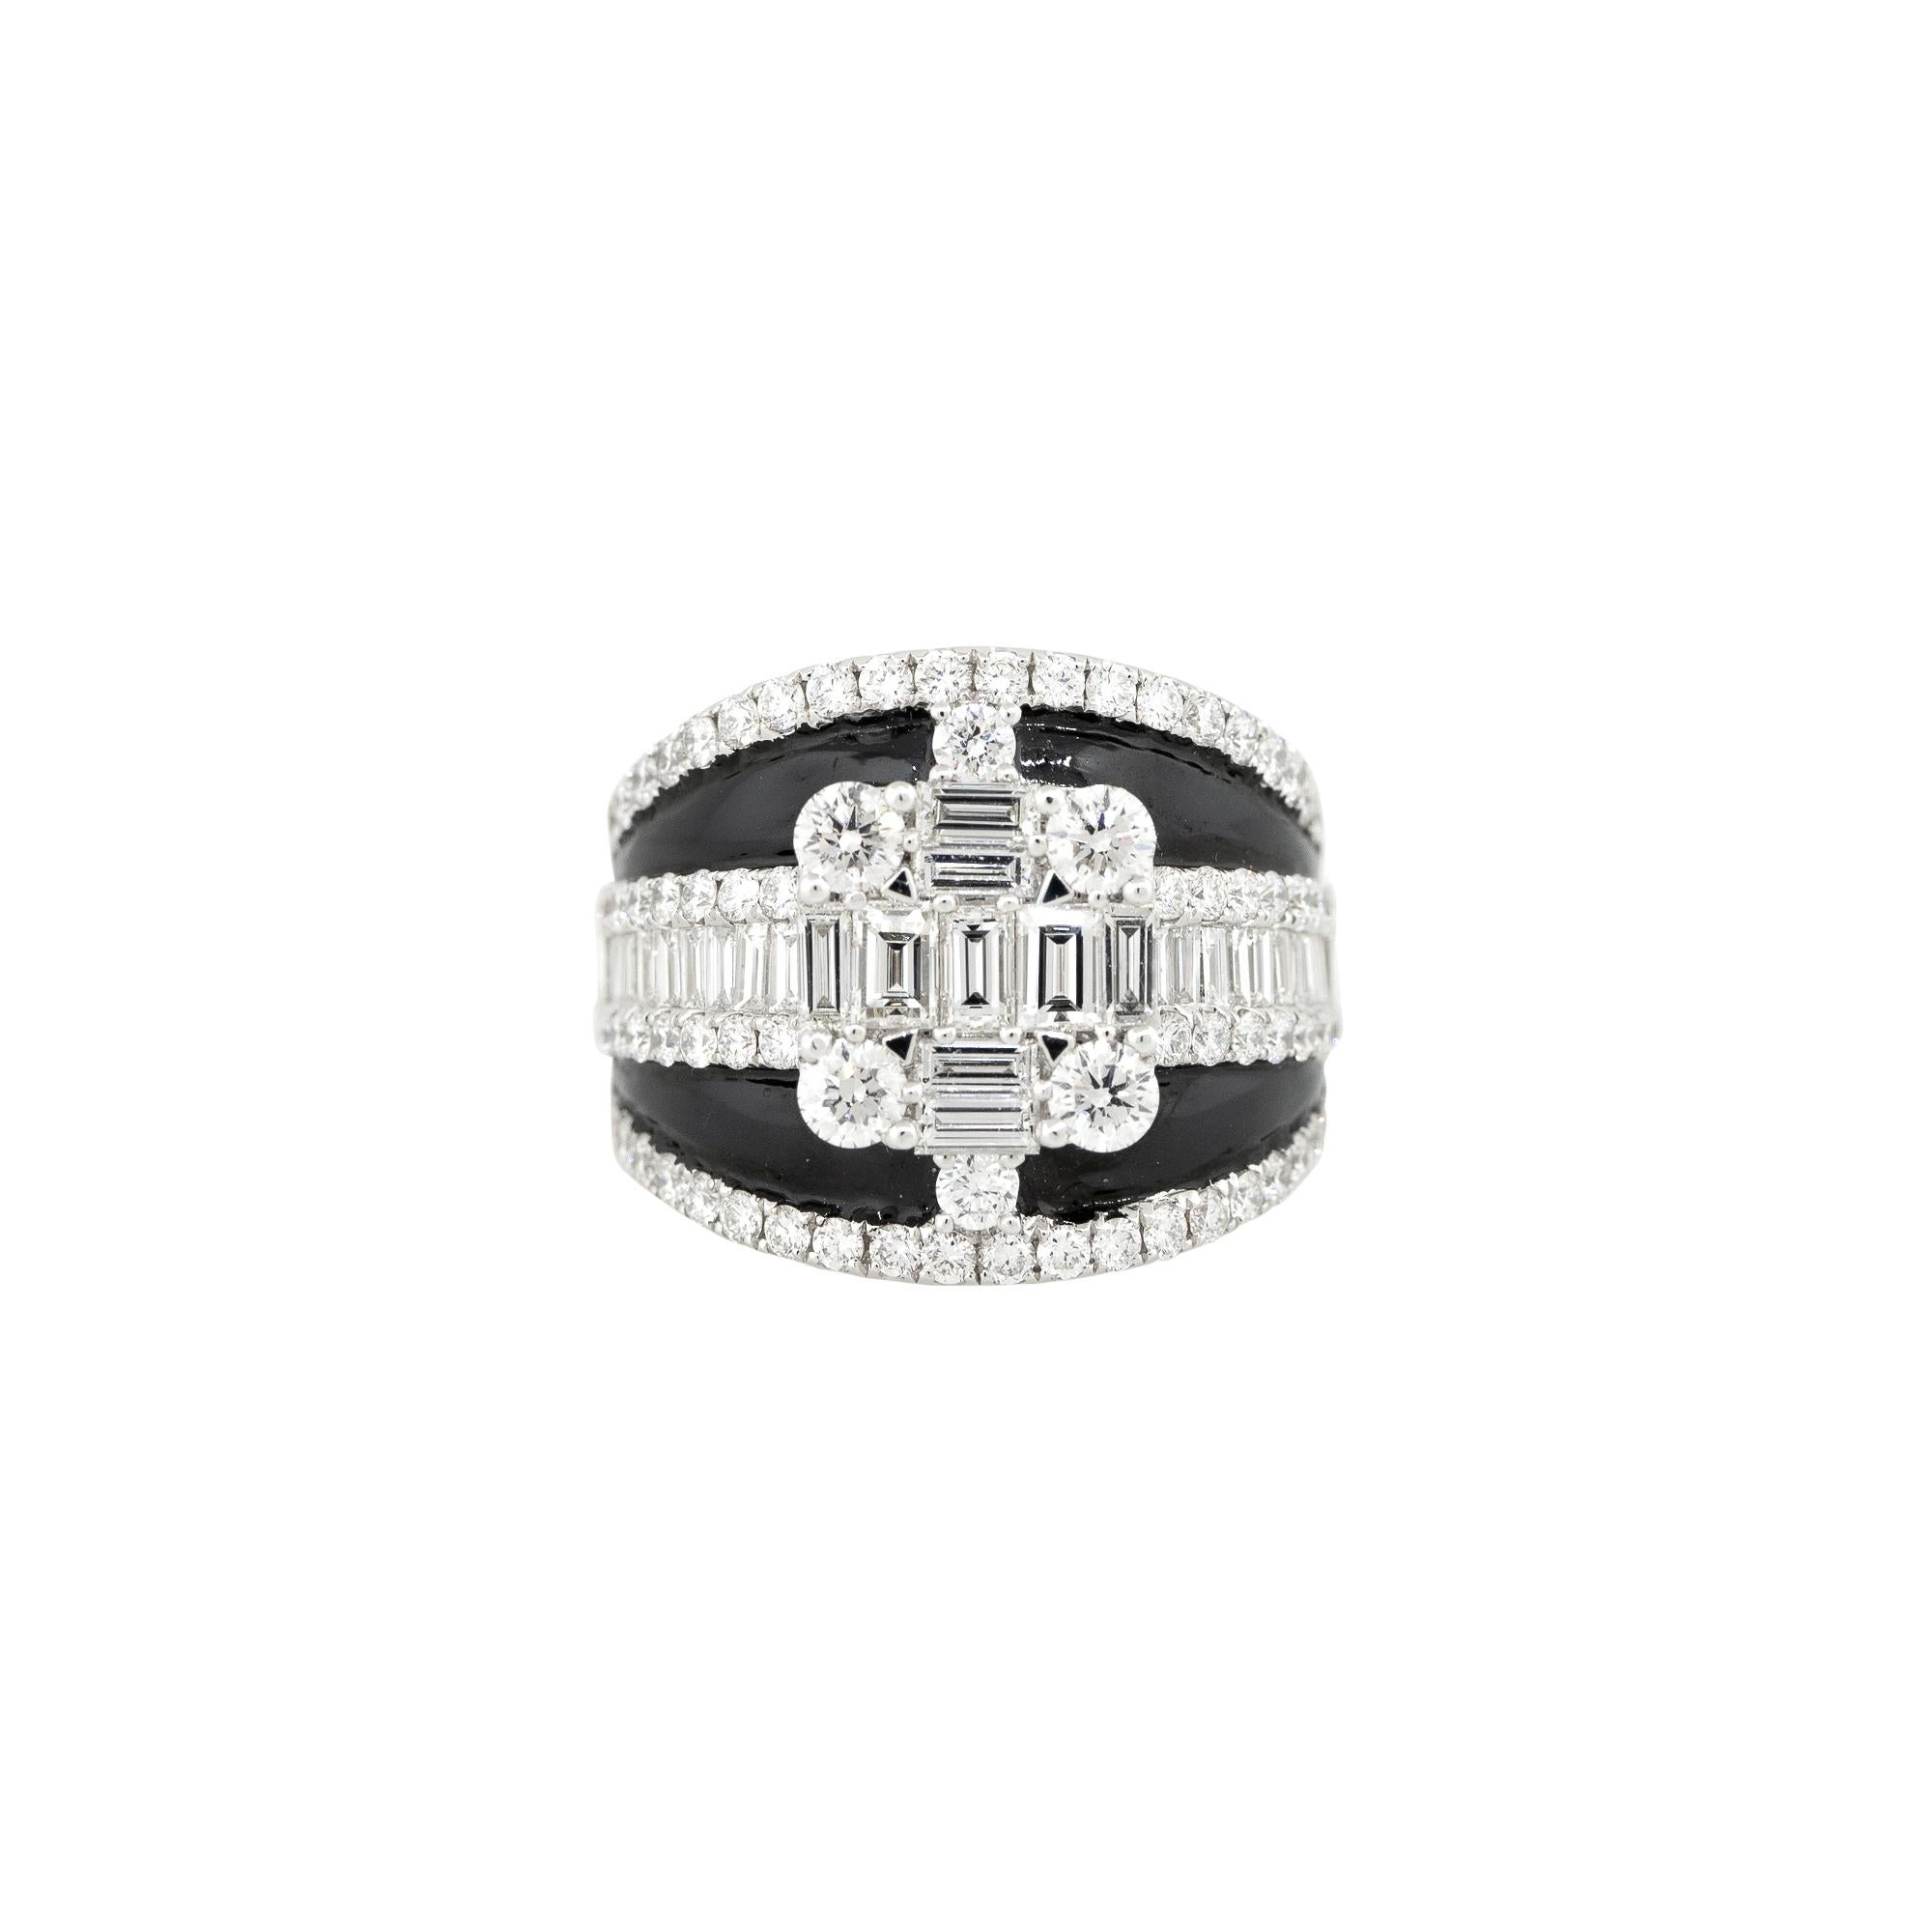 18k White Gold 2.74ctw Diamond and Black Enamel Mosaic Band
Style: Women's Diamond Enamel Ring
Material: 18k White Gold, Enamel
Main Diamond Details: Approximately 2.74ctw of Mosaic set, Baguette and Round Brilliant Cut Diamonds. There are 108